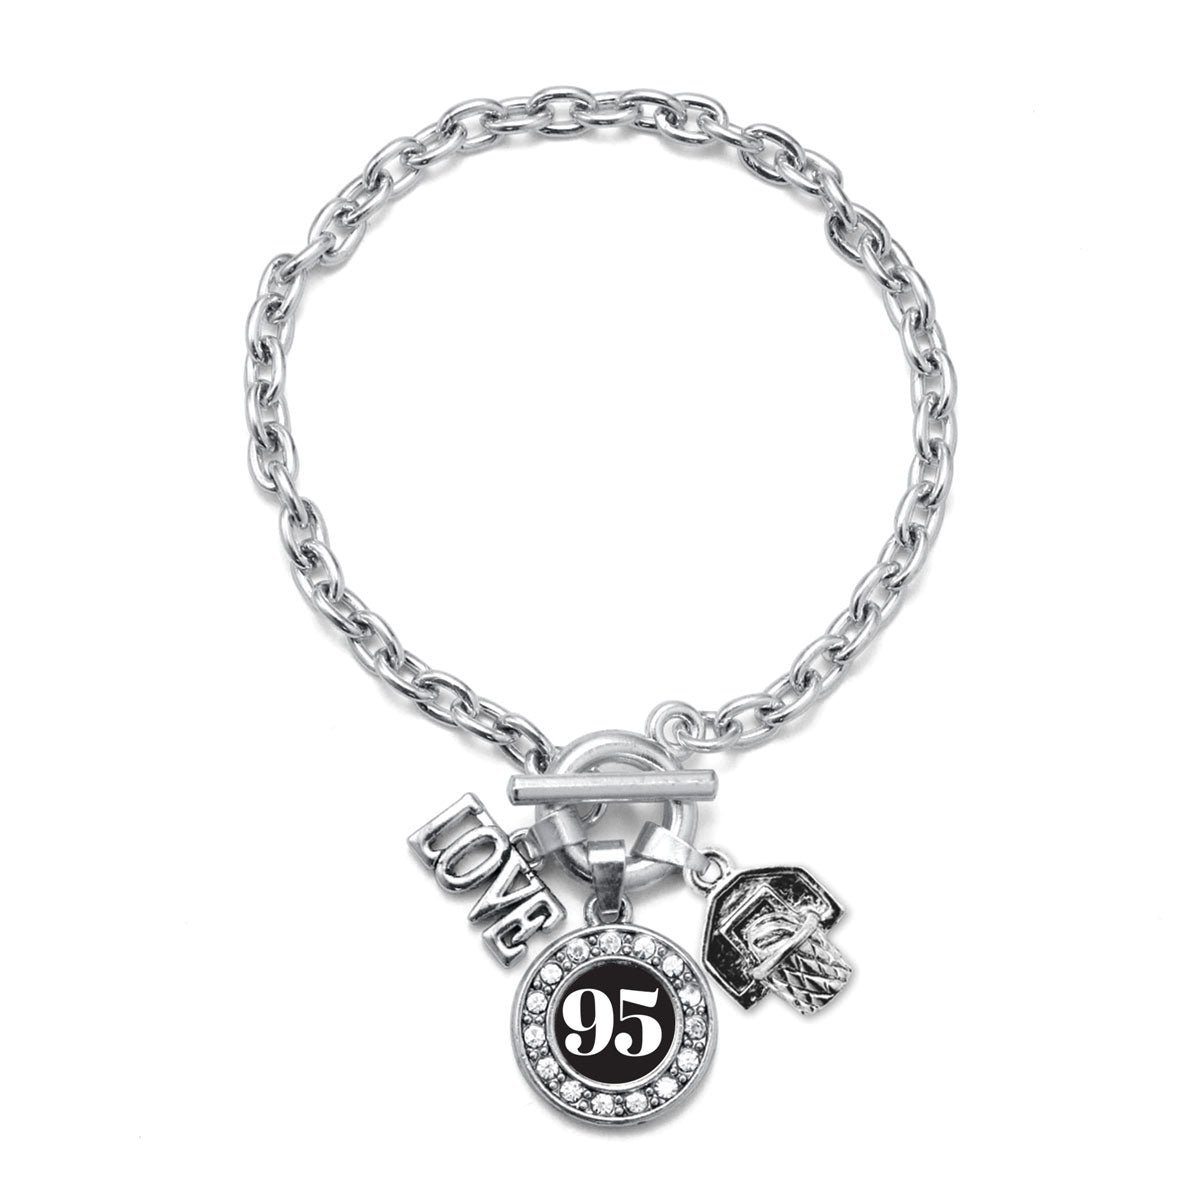 Silver Basketball Hoop - Sports Number 95 Circle Charm Toggle Bracelet